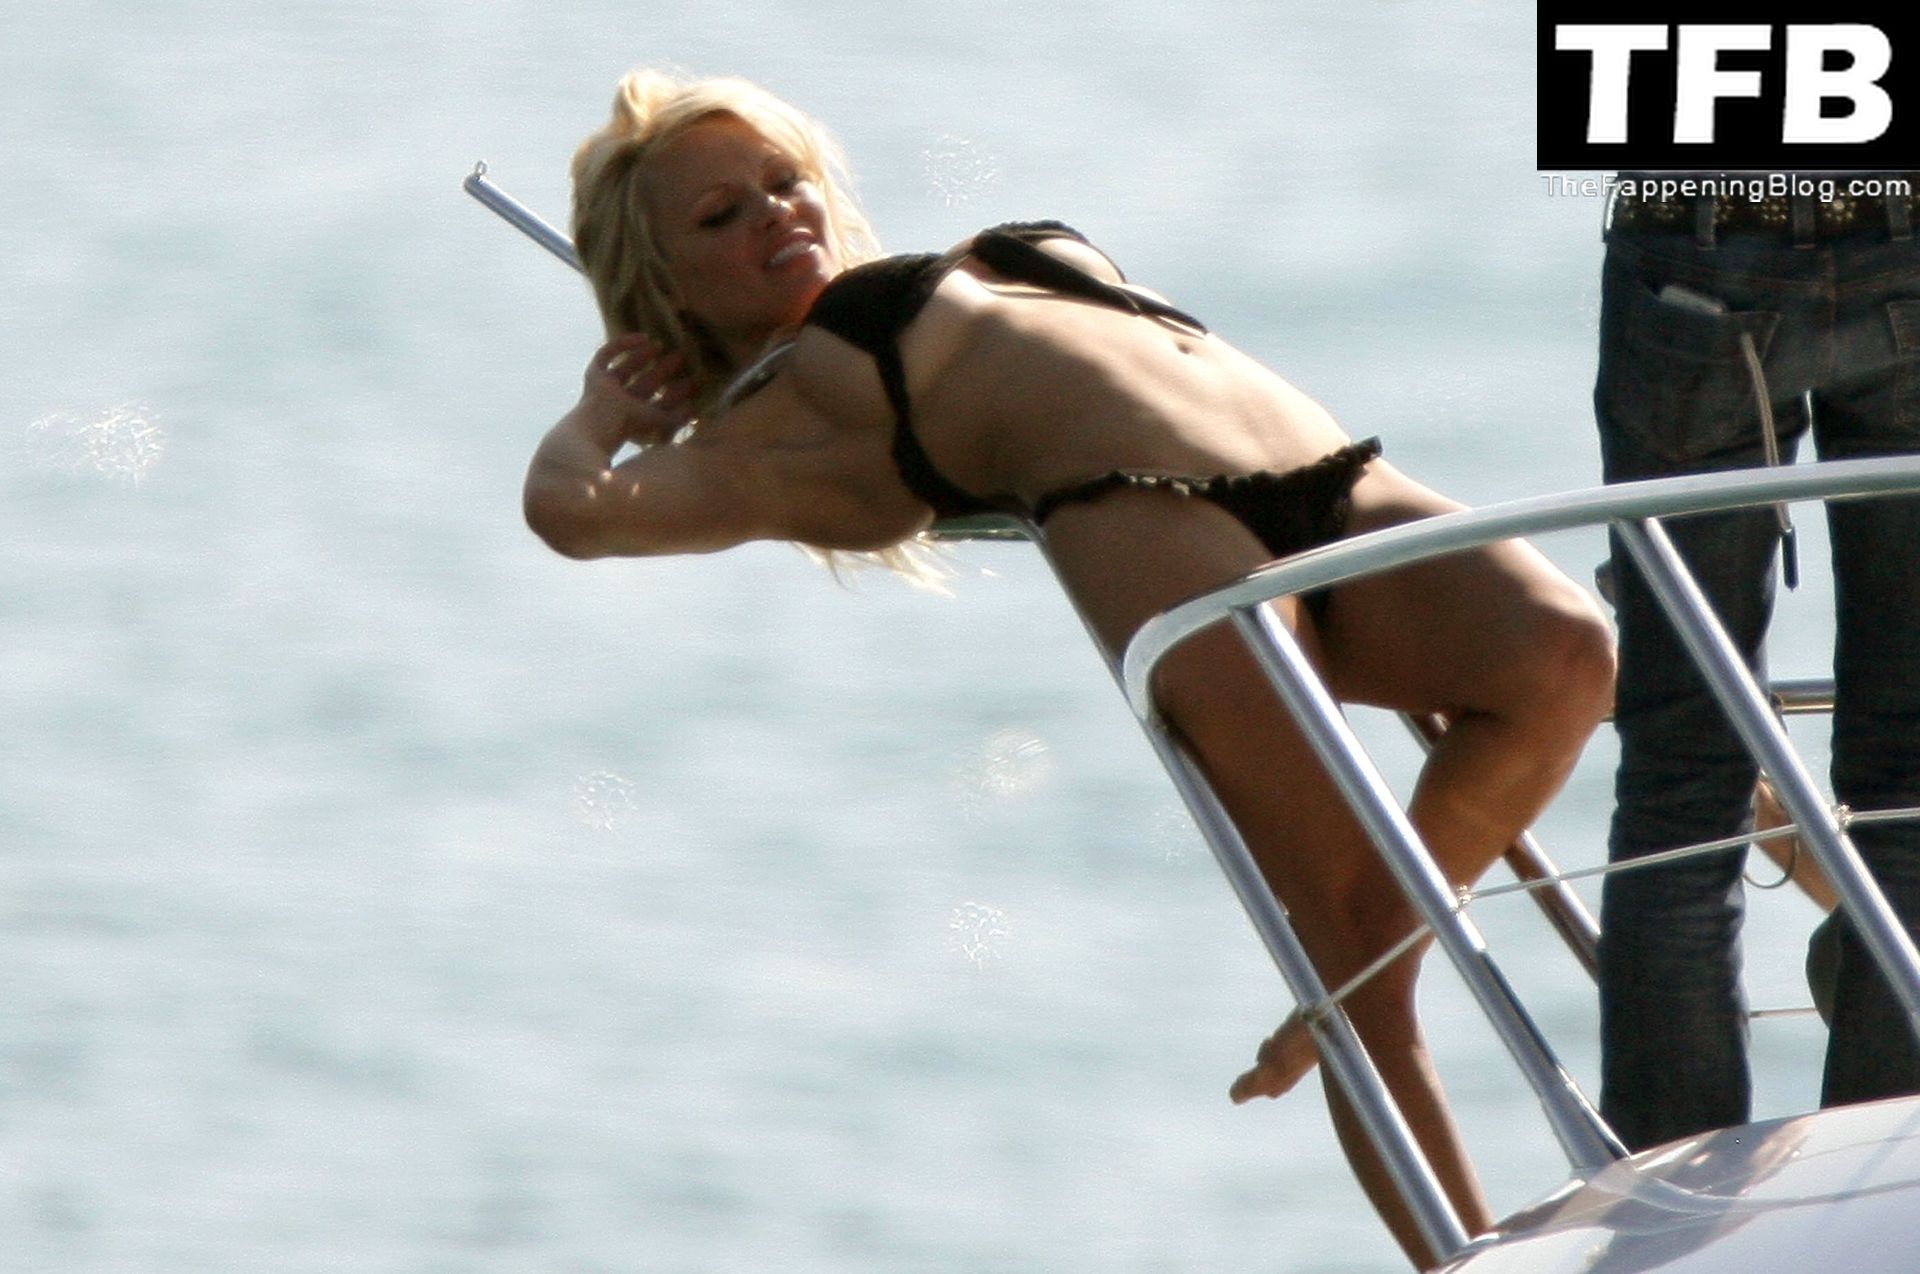 Pamela-Anderson-Topless-Sexy-The-Fappening-Blog-51.jpg